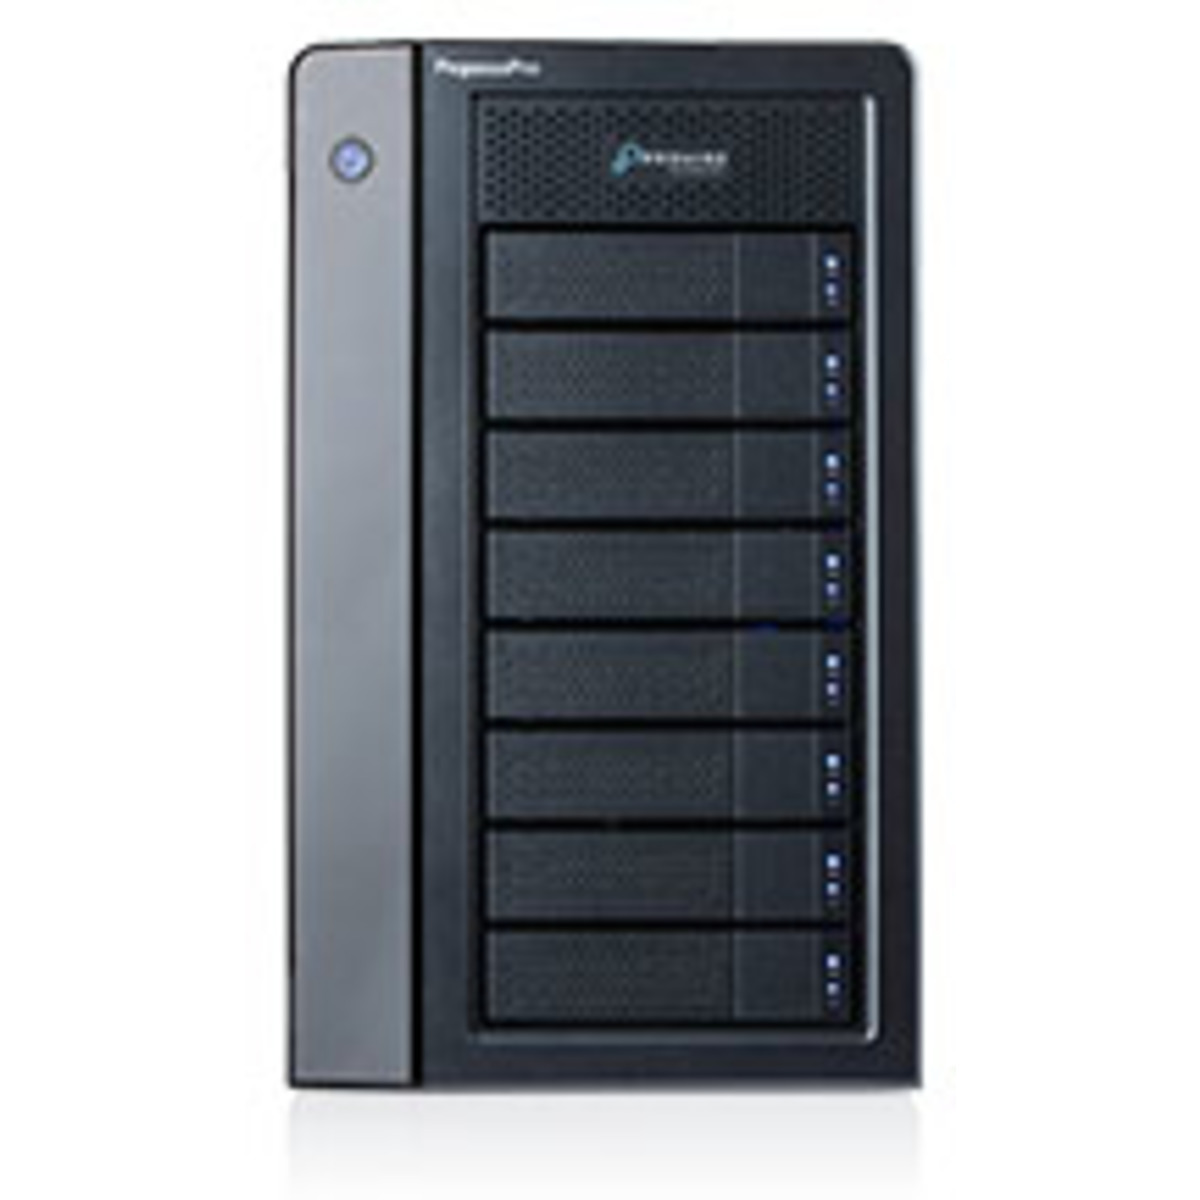 Promise Technology PegasusPro R8 176tb 8-Bay Desktop Multimedia / Power User / Business DAS-NAS - Combo Direct + Network Storage Device 8x22tb Seagate IronWolf Pro ST22000NT001 3.5 7200rpm SATA 6Gb/s HDD NAS Class Drives Installed - Burn-In Tested PegasusPro R8